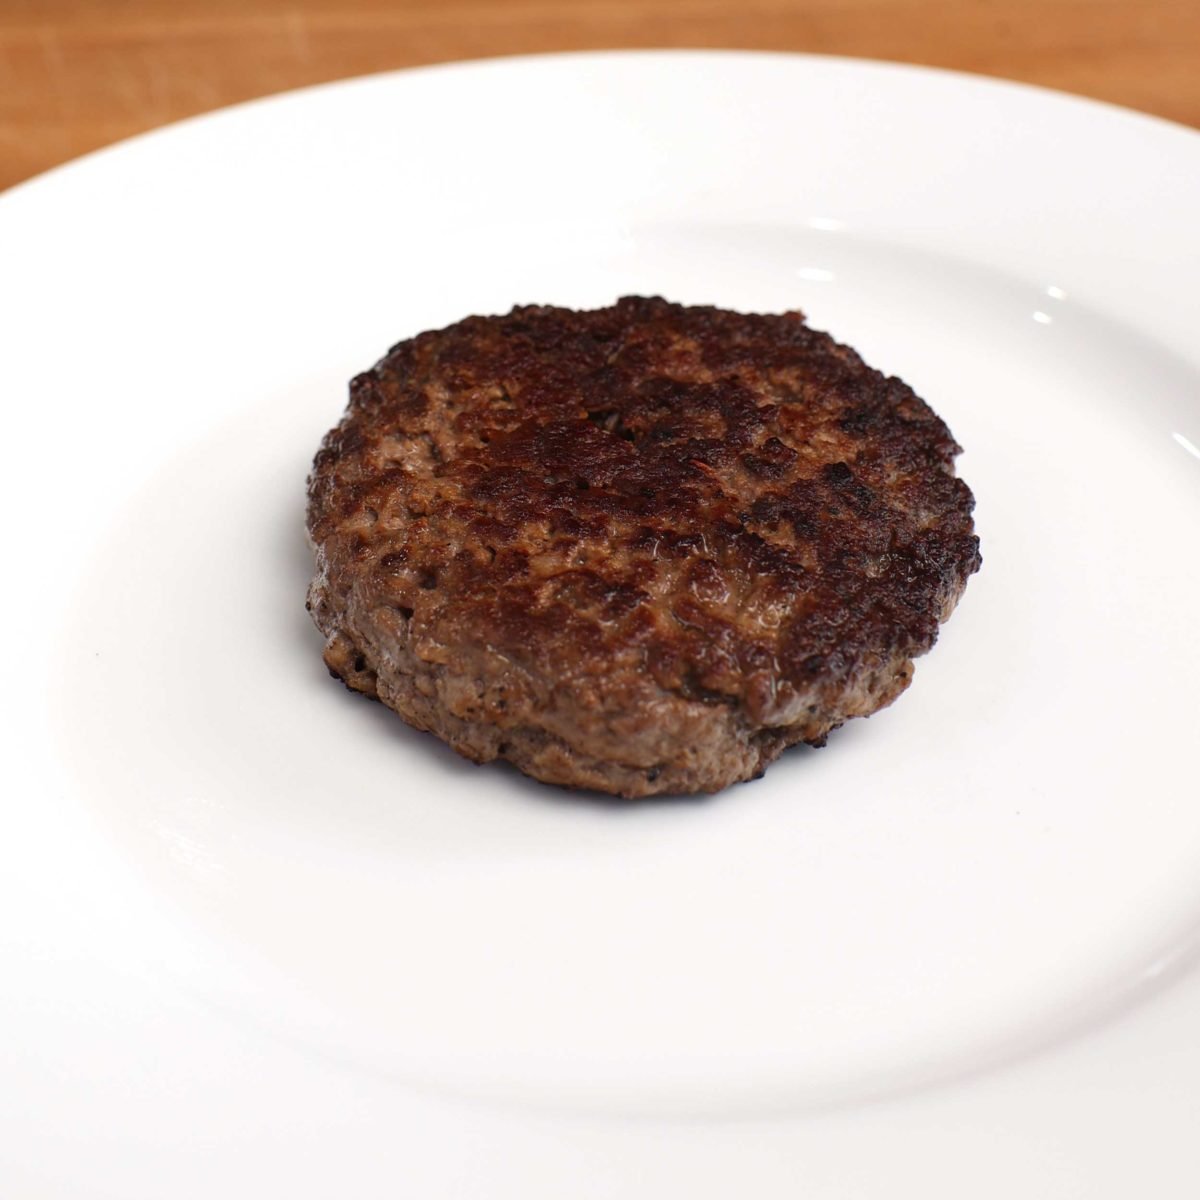 a cooked hamburger patty on a white plate.